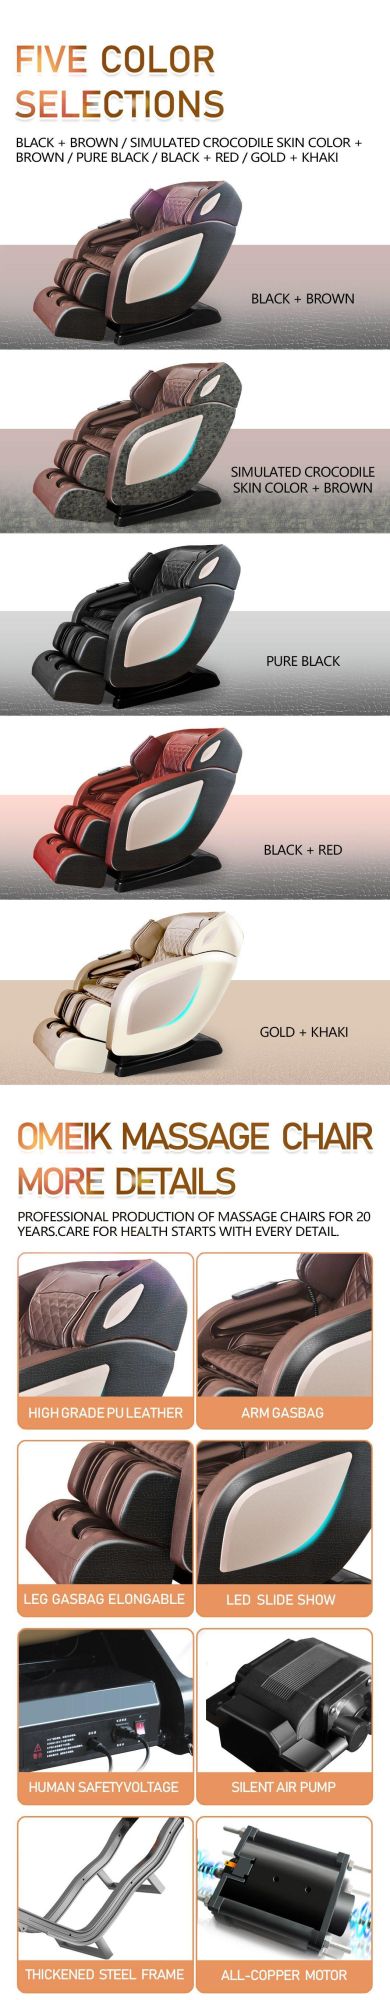 4D Intelligent Rocking Motion Double SL Track Automatic Modes Arm Sync Moving Rolling Massage Chair with 3D Mechanism